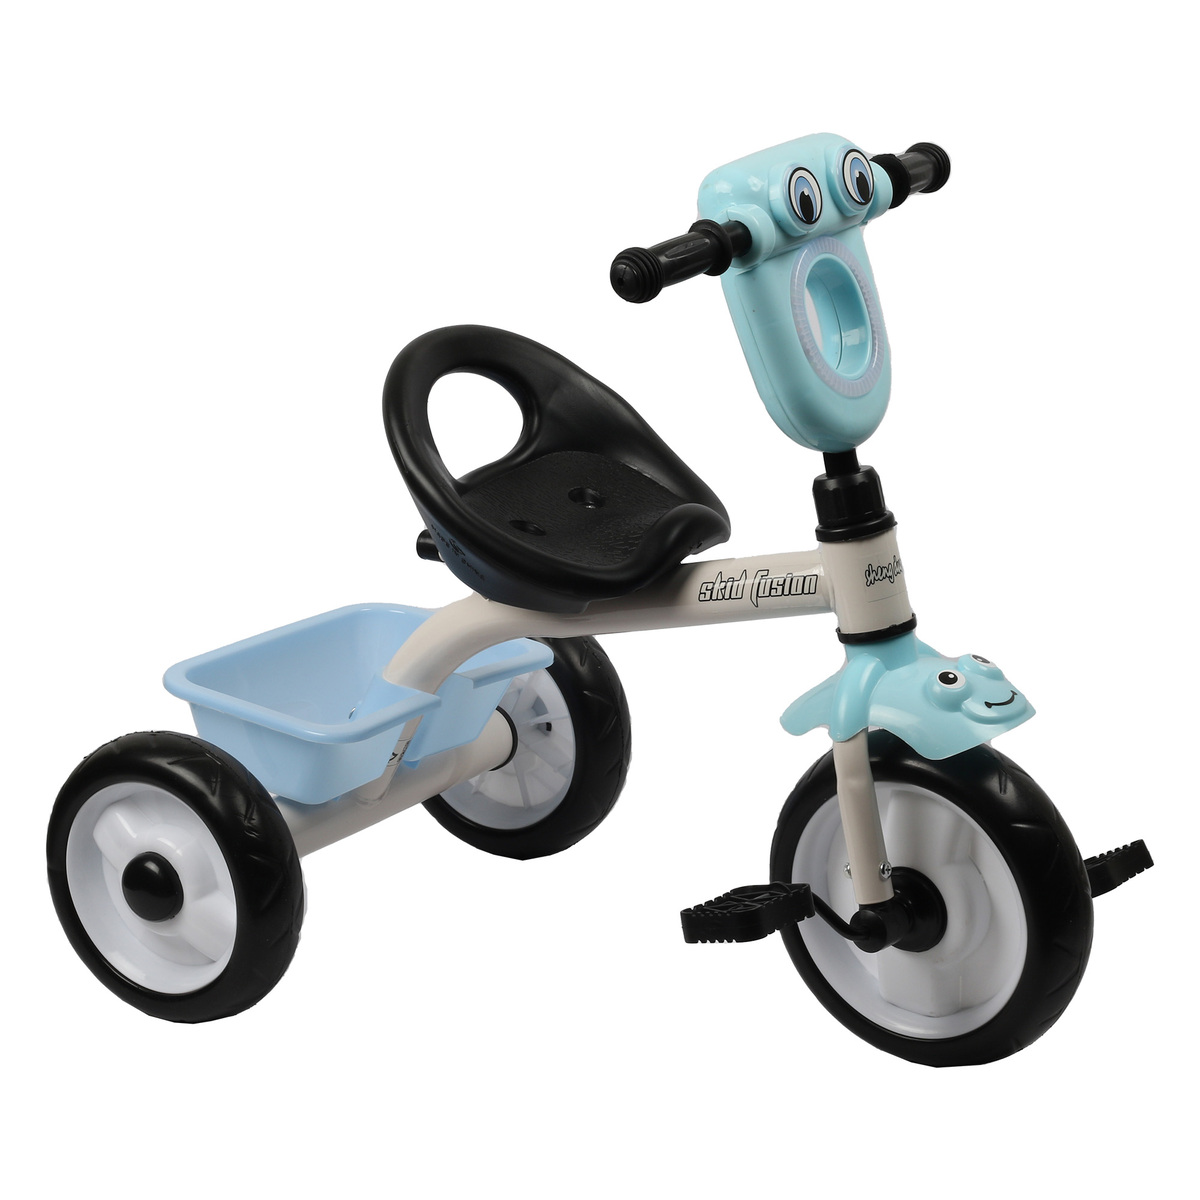 Skid Fusion Tricycle S723 Blue